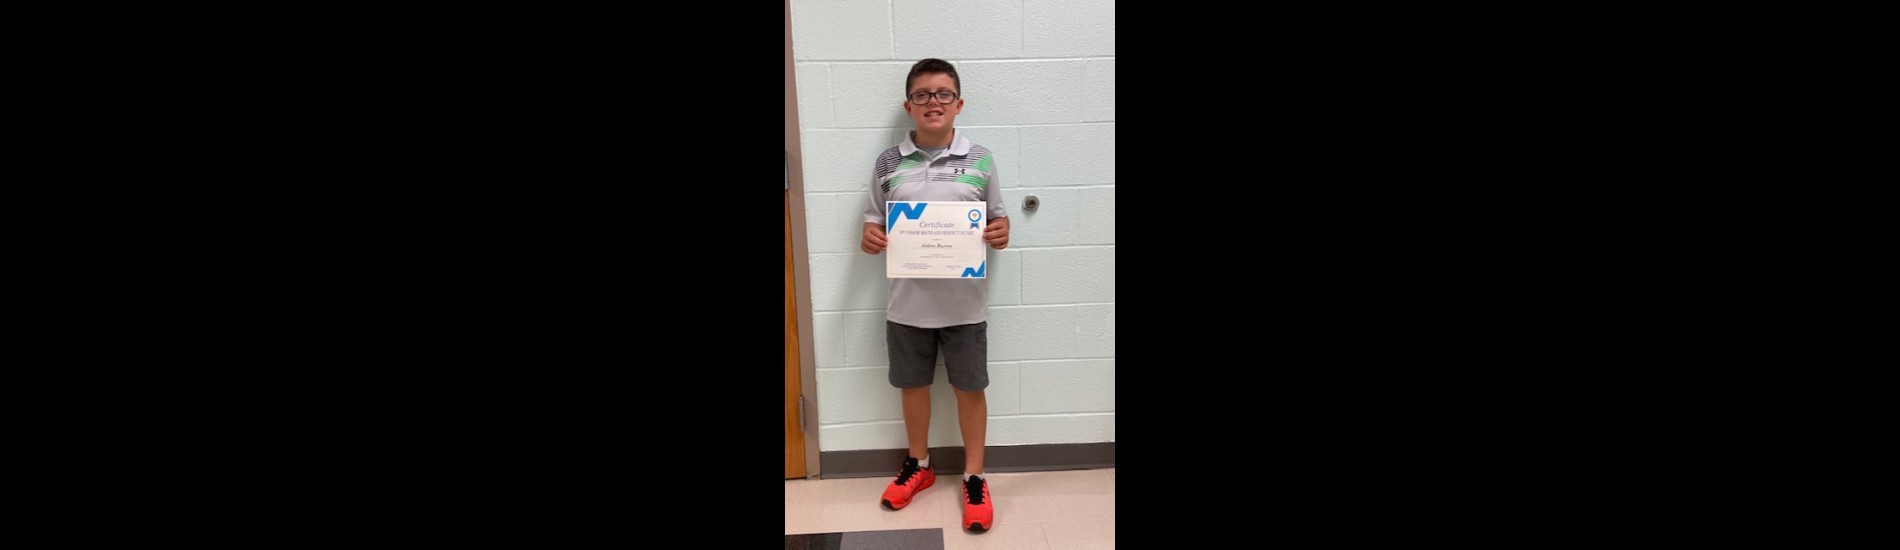 Aiden Burns poses with a recent award he earned.